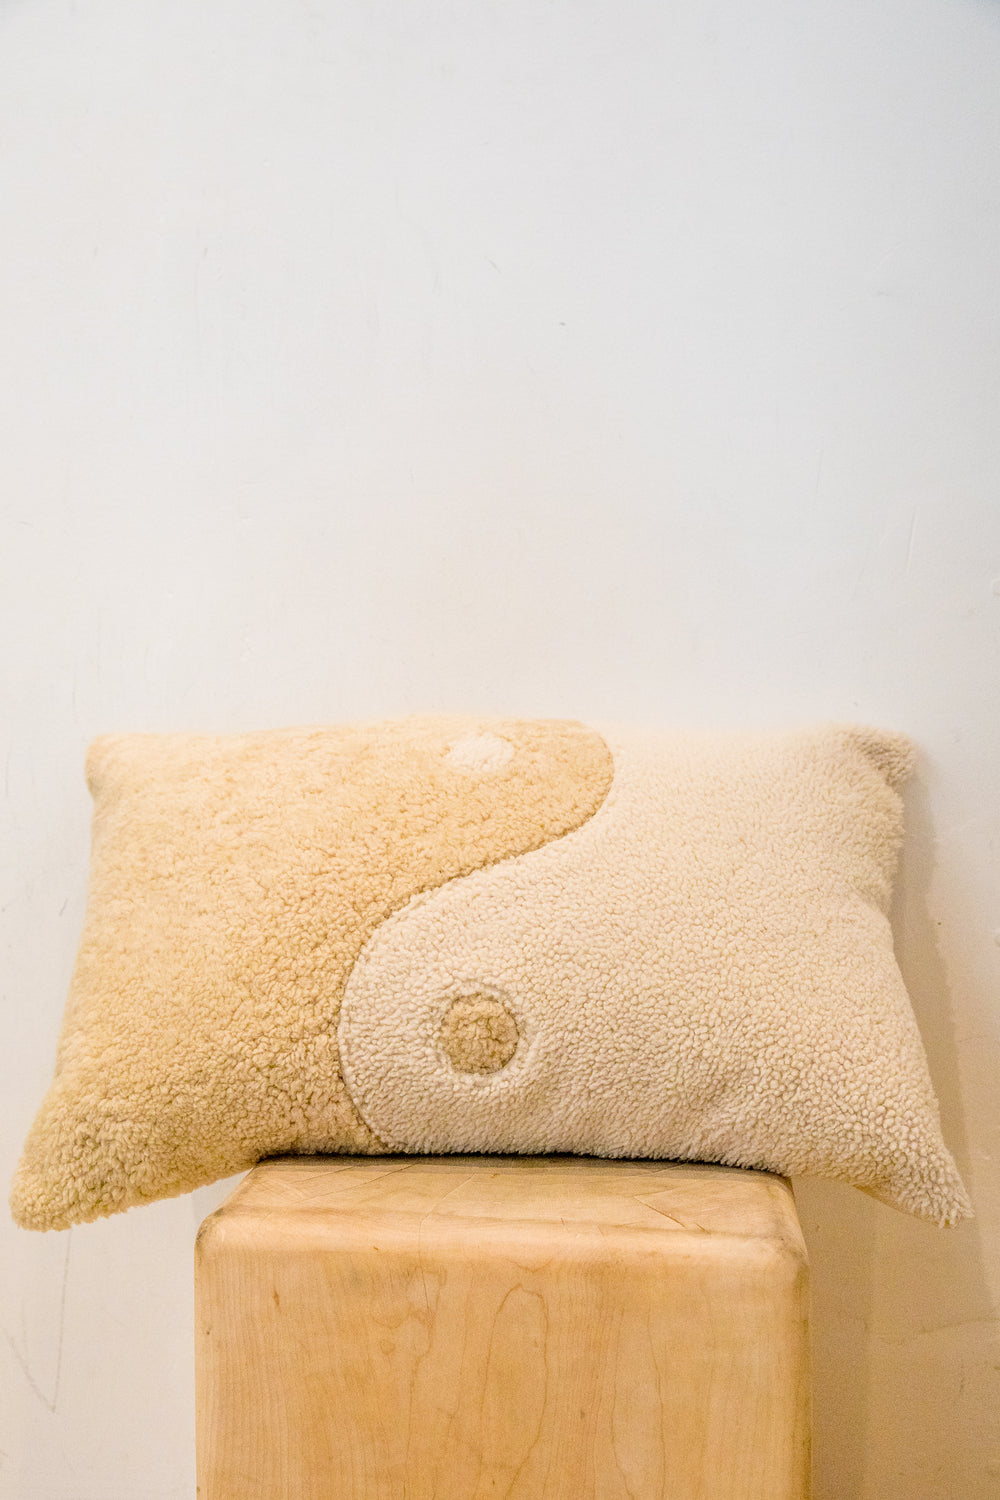 X Prism Beige + White Yin Yang Patchwork Pillow